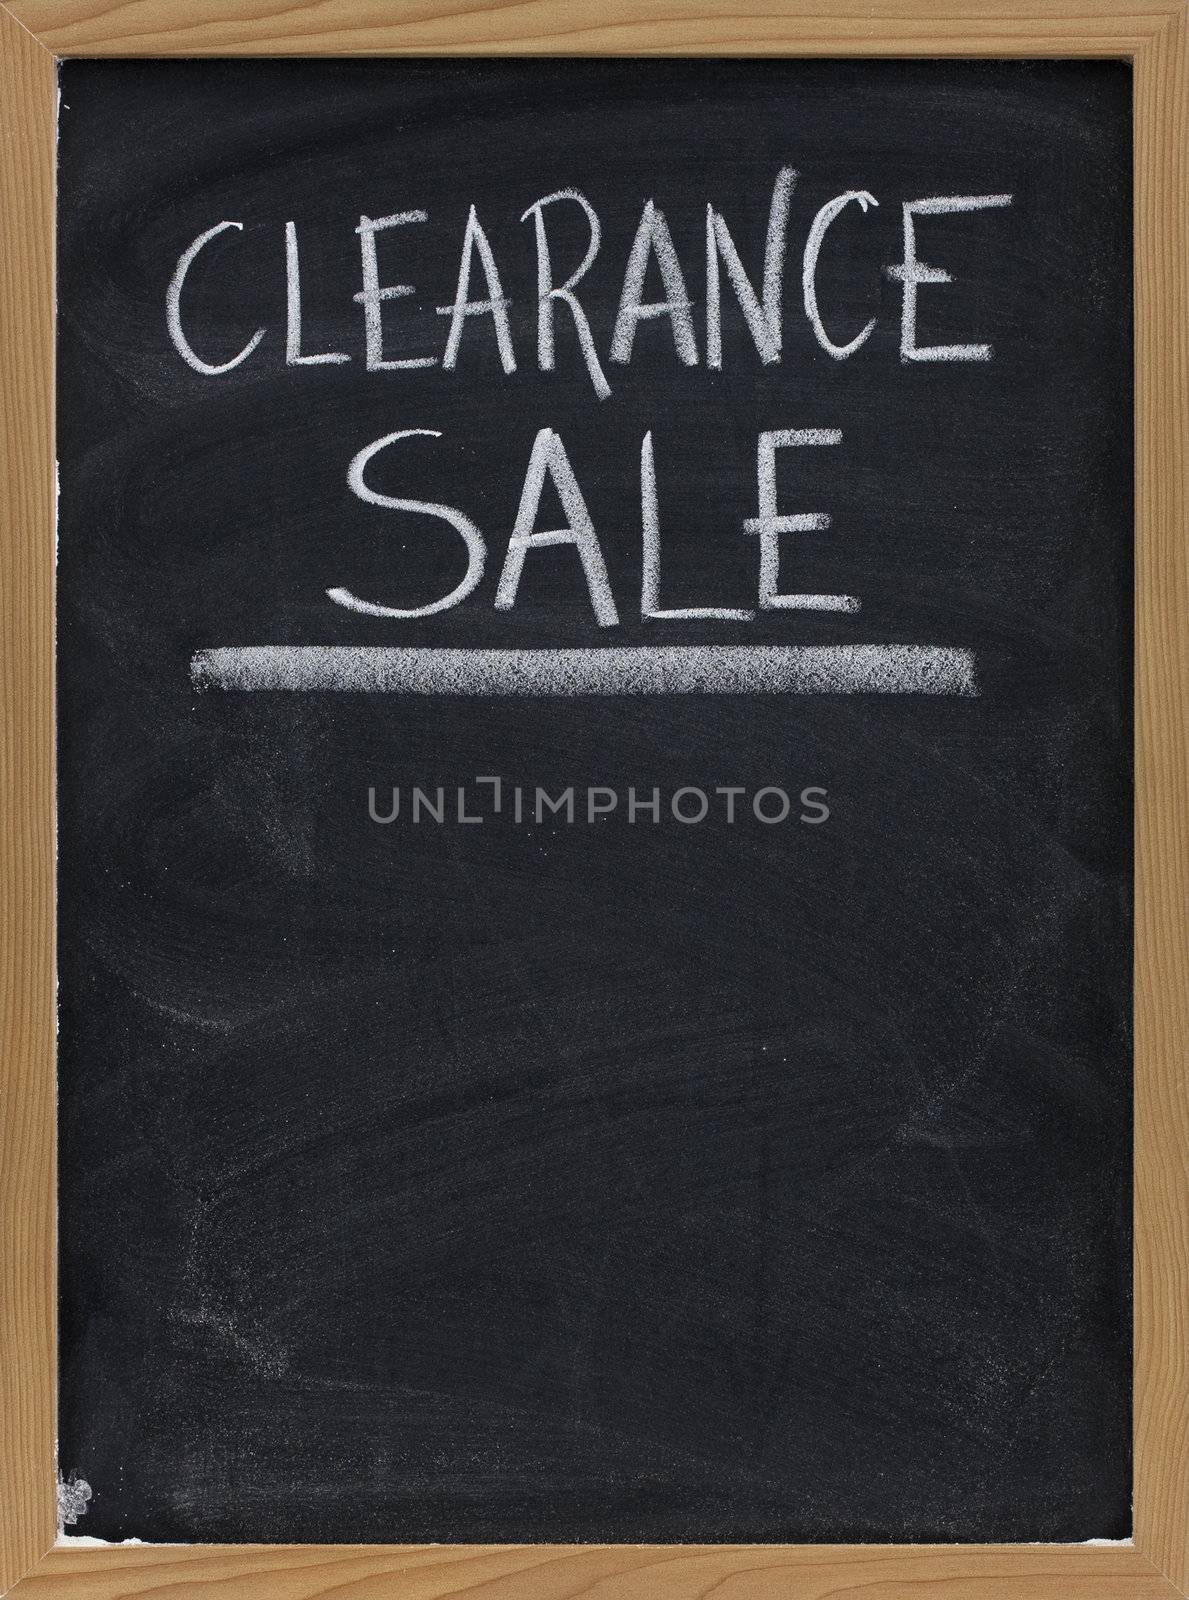 clearance sale text handwritten with white chalk on blackboard with copy space below